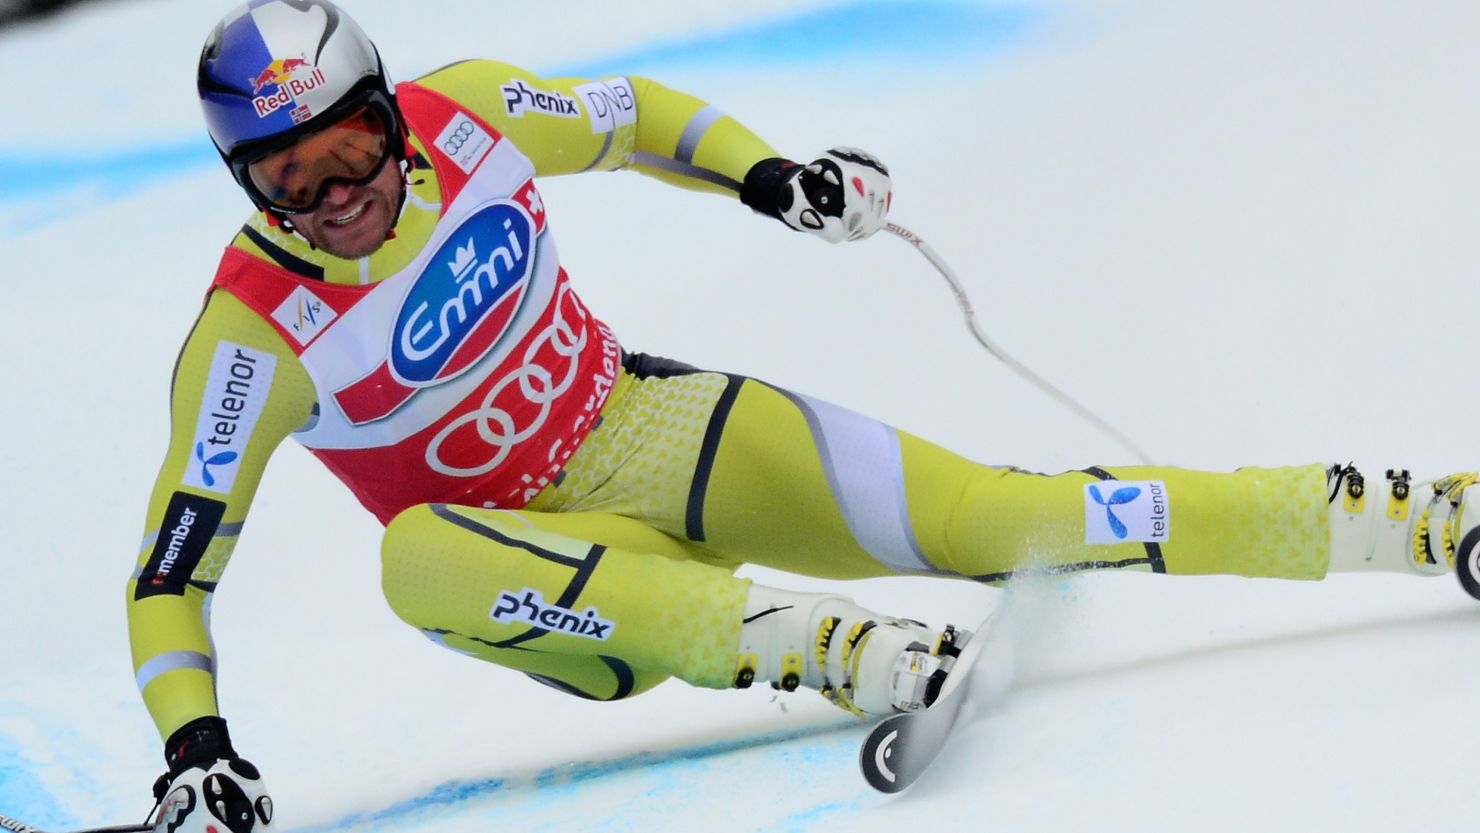 Aksel Lund Svindal powers his way to victory in the men's World Cup super-G at Val Gardena.